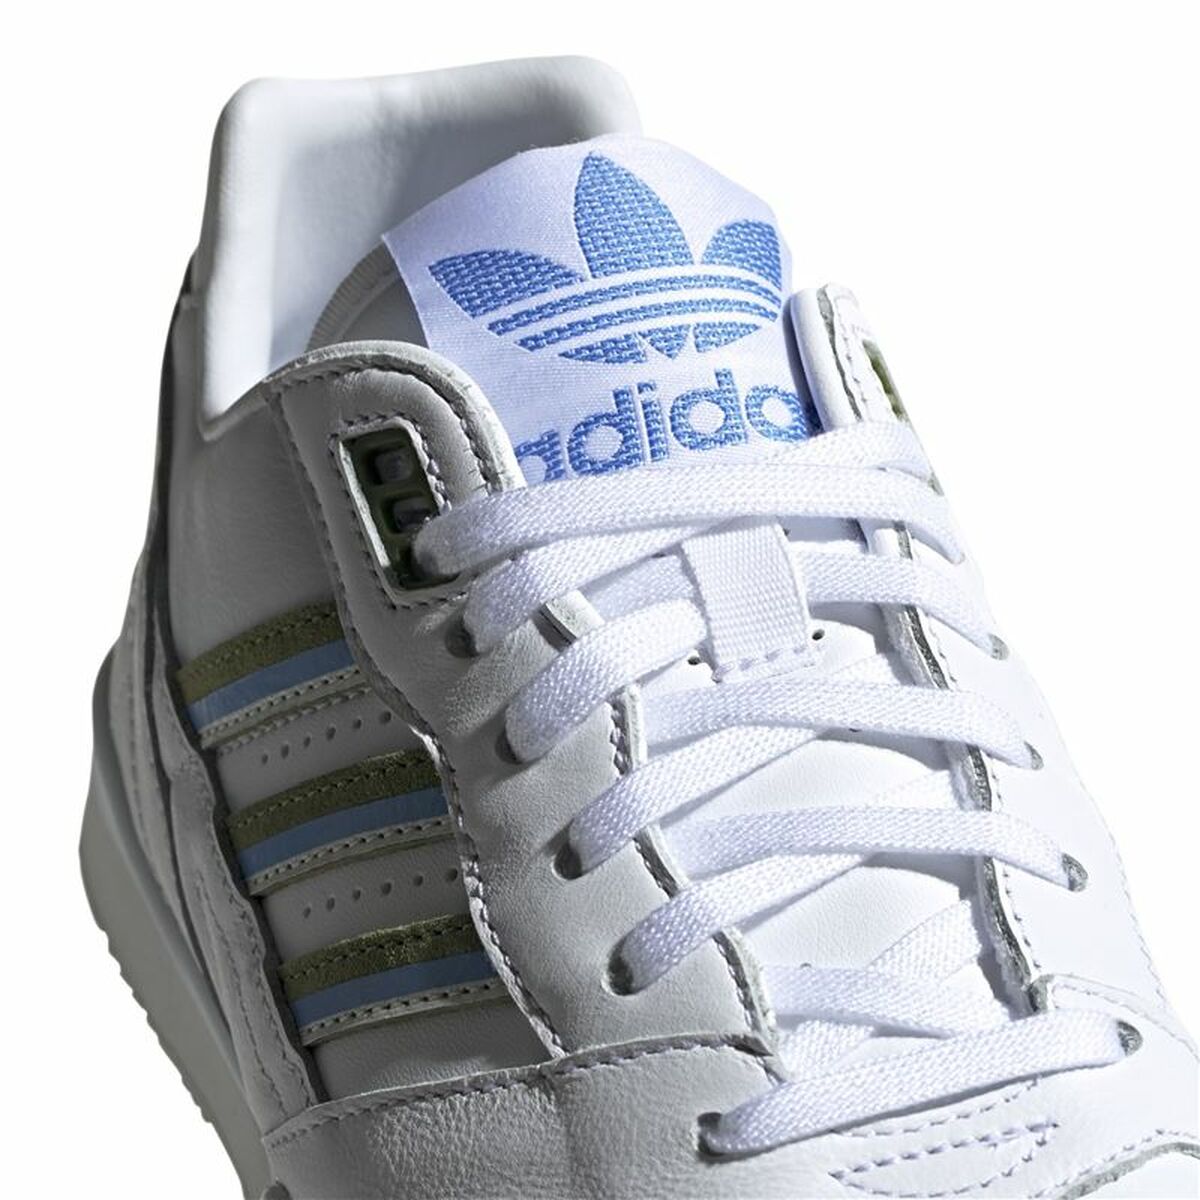 Sports Trainers for Women Adidas Originals A.R. Trainer White